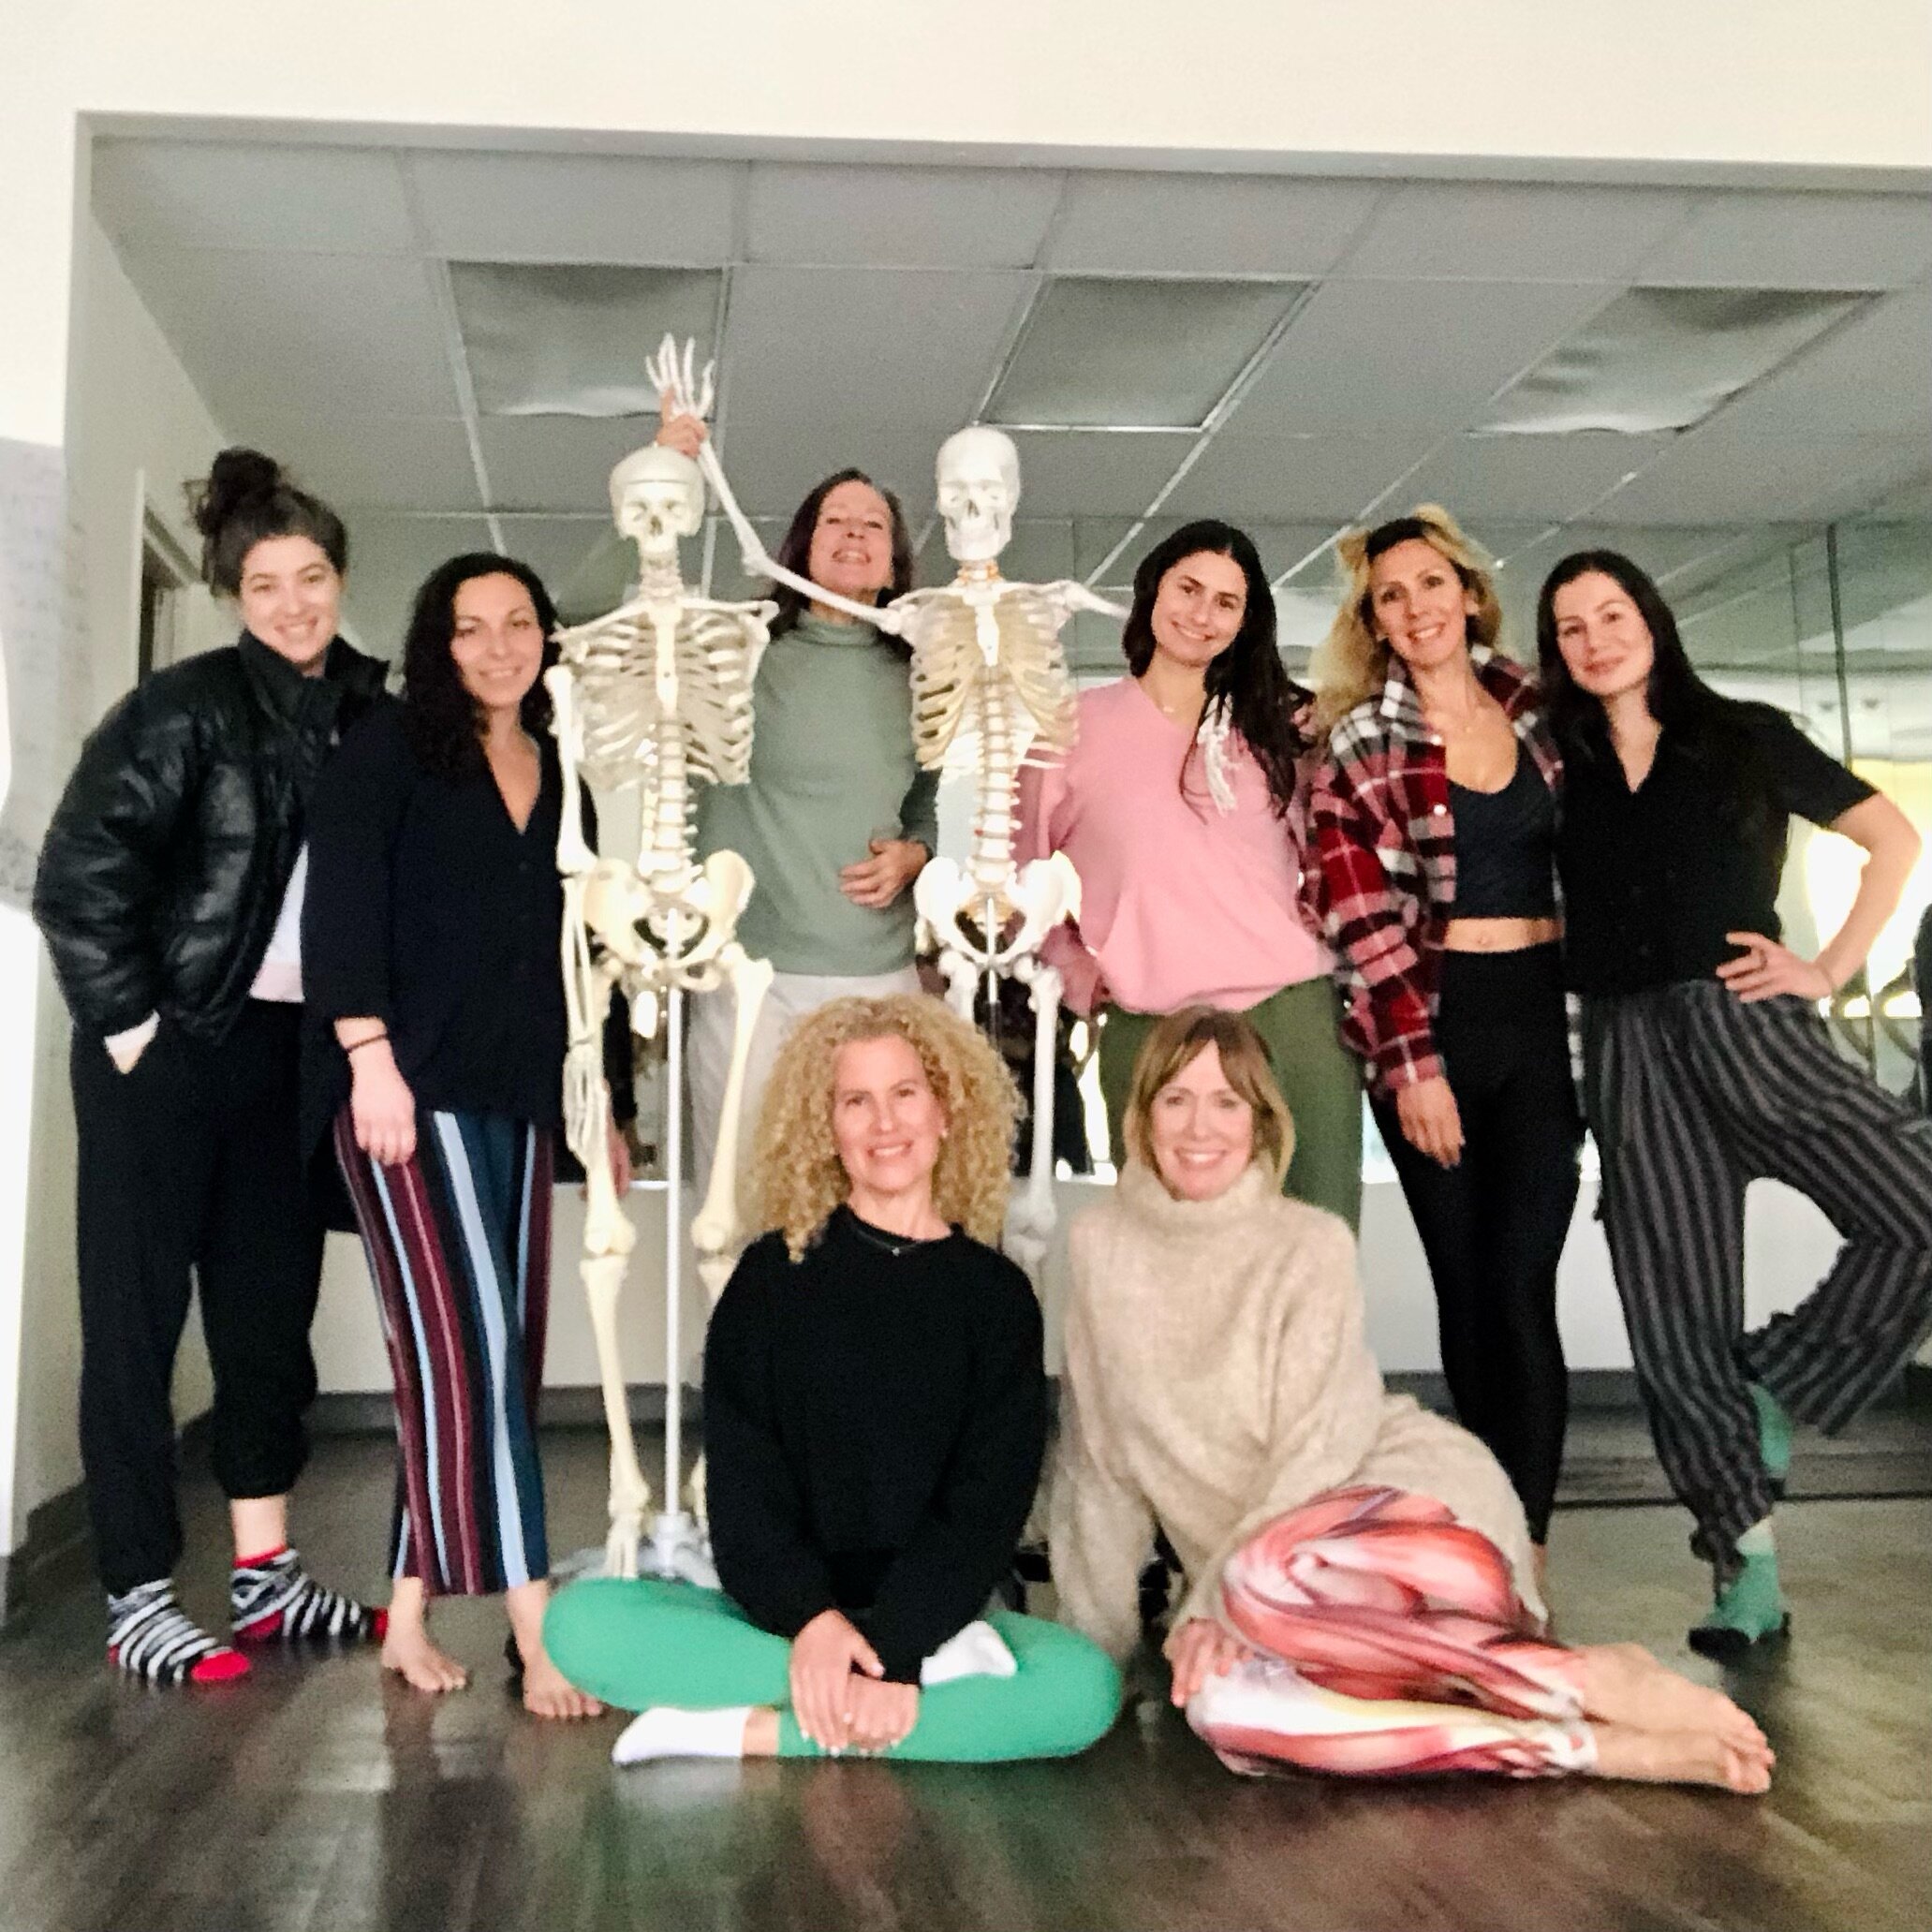 Glorious, intelligent, exceptional women. An honor to share this time with you exploring anatomy, movement and yoga. I believe you cannot truly explore yoga anatomy without connecting it both to functional movement and the deeper dimensions of yoga.T